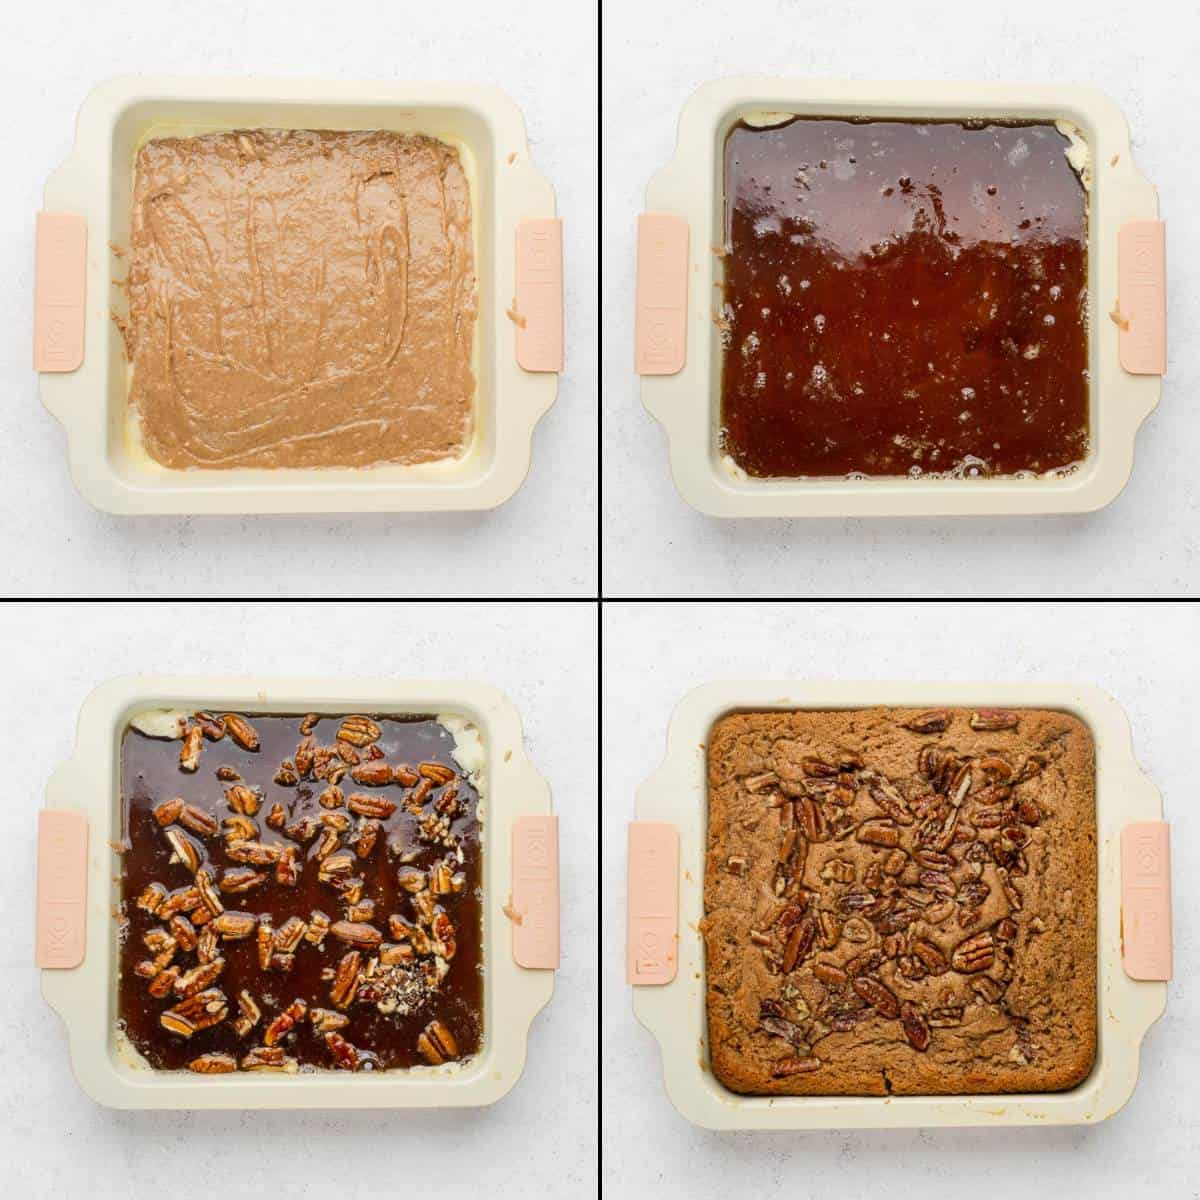 Collage of cinnamon pudding cake batter in a pan, covered with sauce and pecans, and baked.